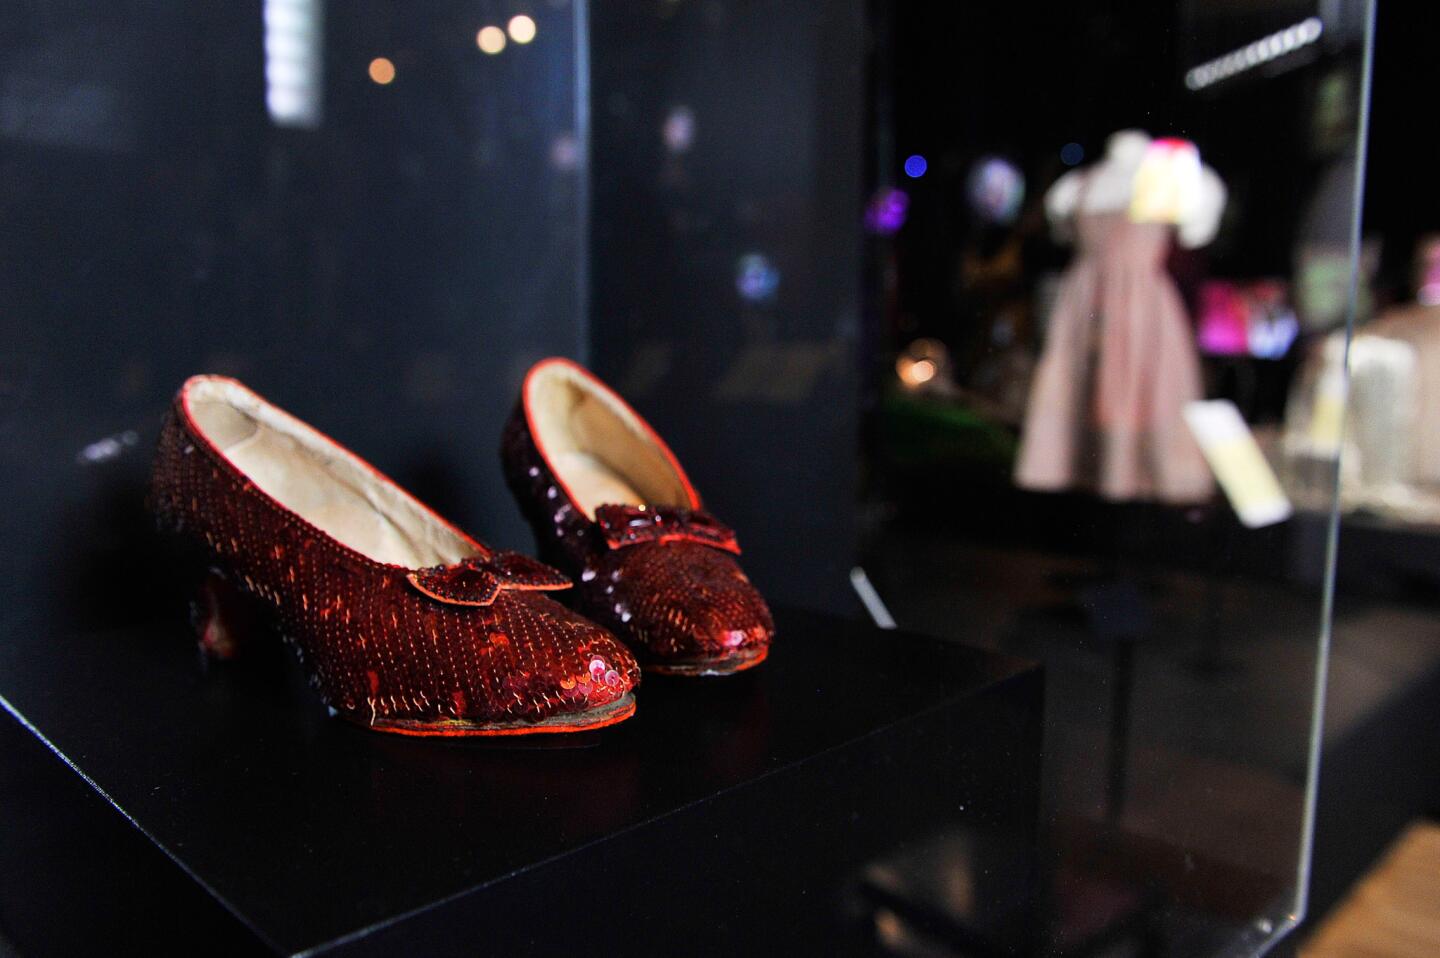 The legendary ruby shoes worn by Dorothy Gale in "The Wizard of Oz" are on display.